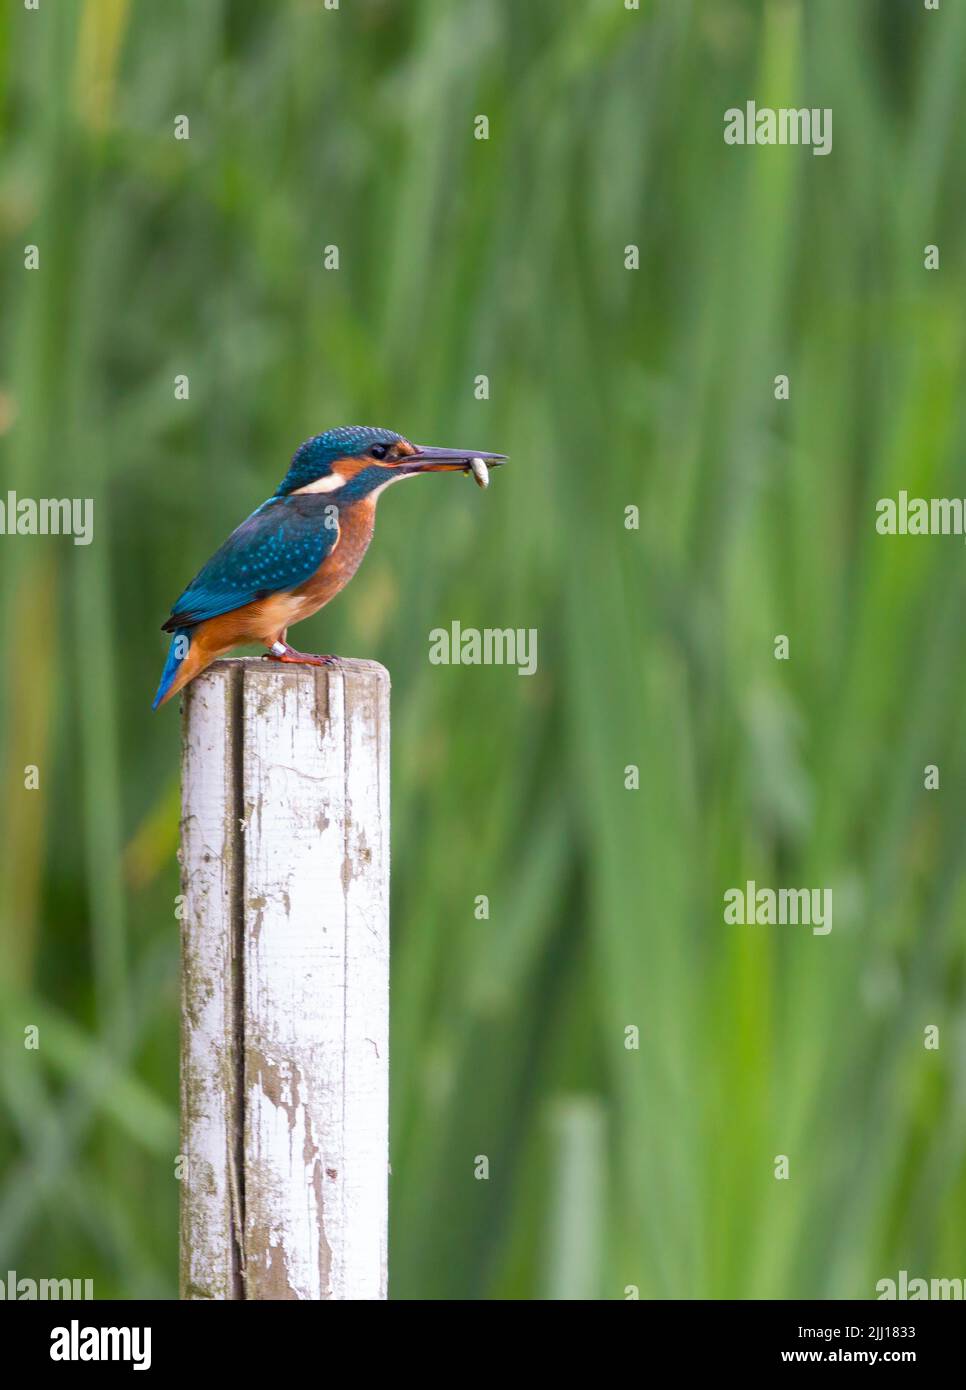 Kingfisher on post with reeds in background (alcedo atthis) electric blue and orange colours a little muted in shade female has orange lower bill Stock Photo